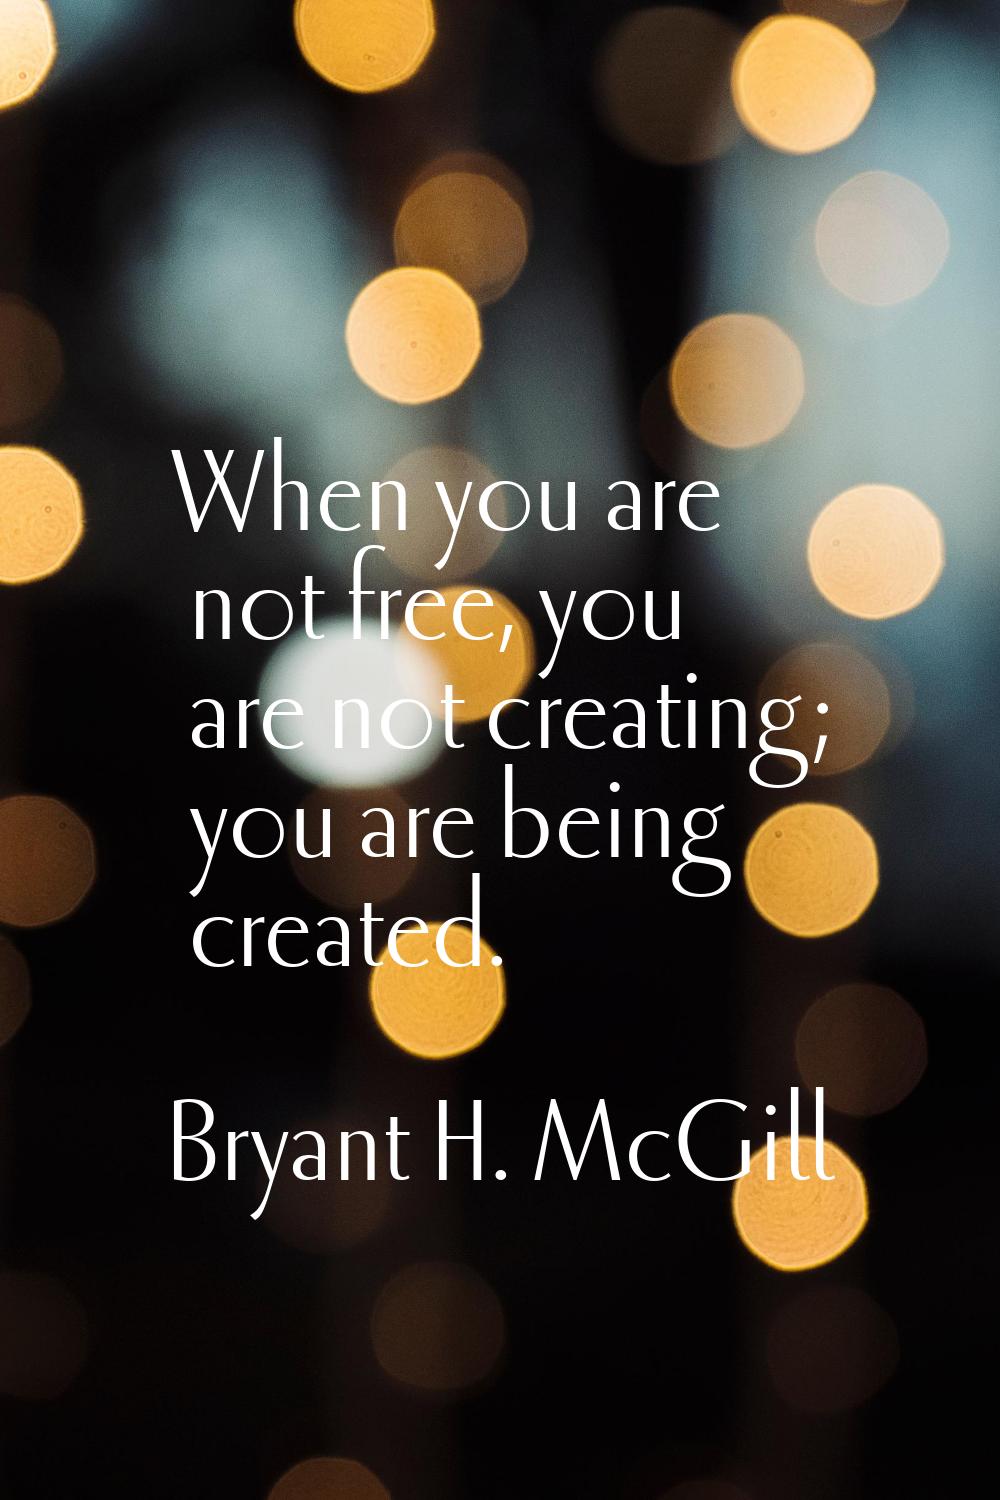 When you are not free, you are not creating; you are being created.